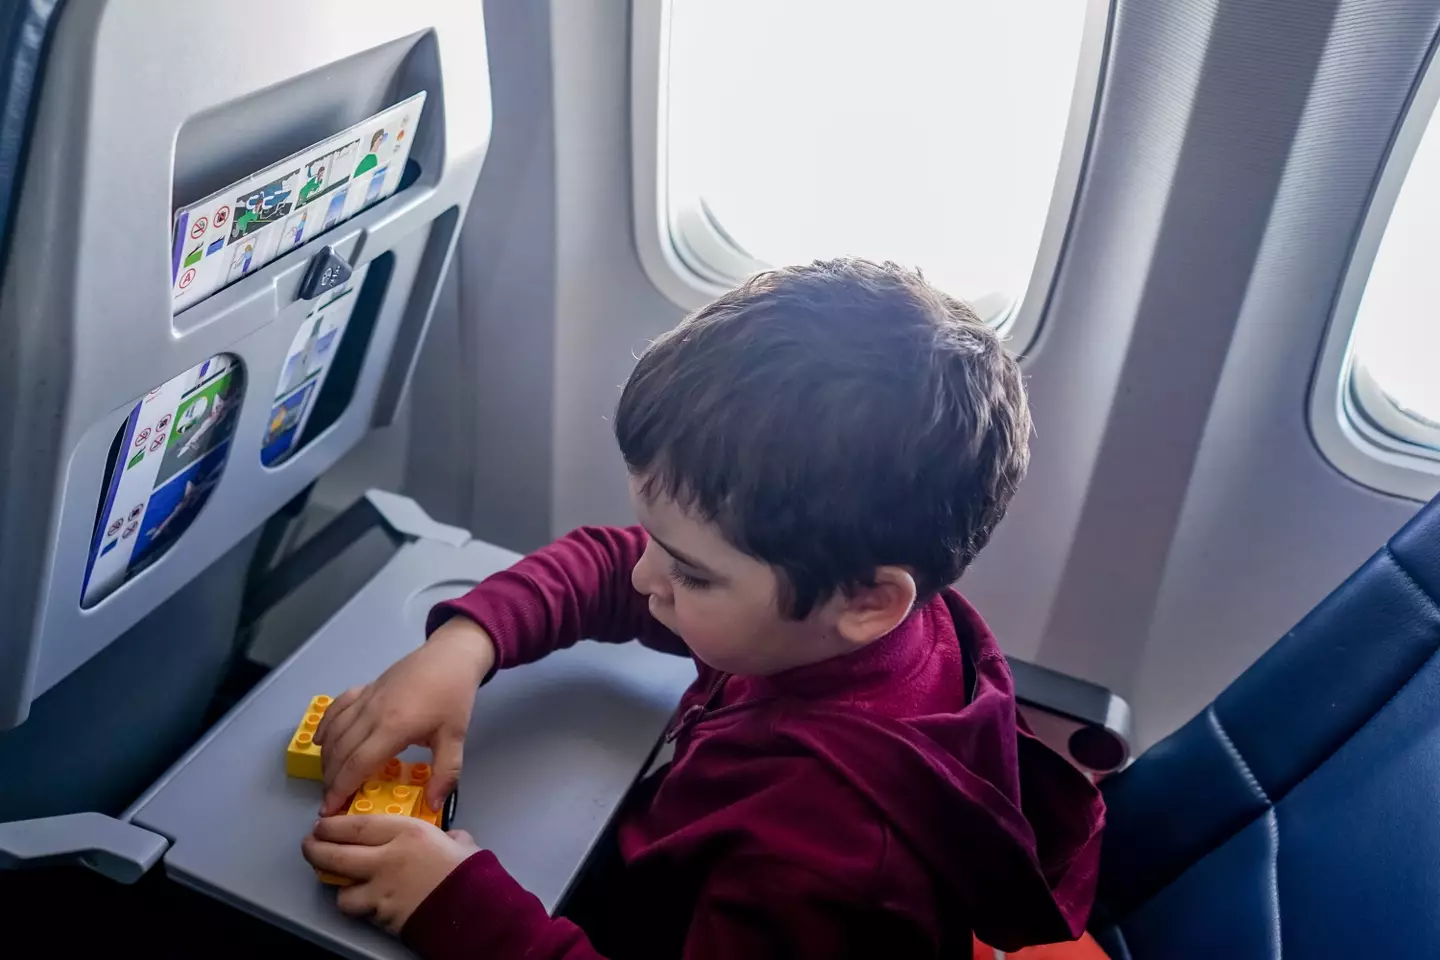 A mum's partners wants her to leave her son in economy while they fly business class.